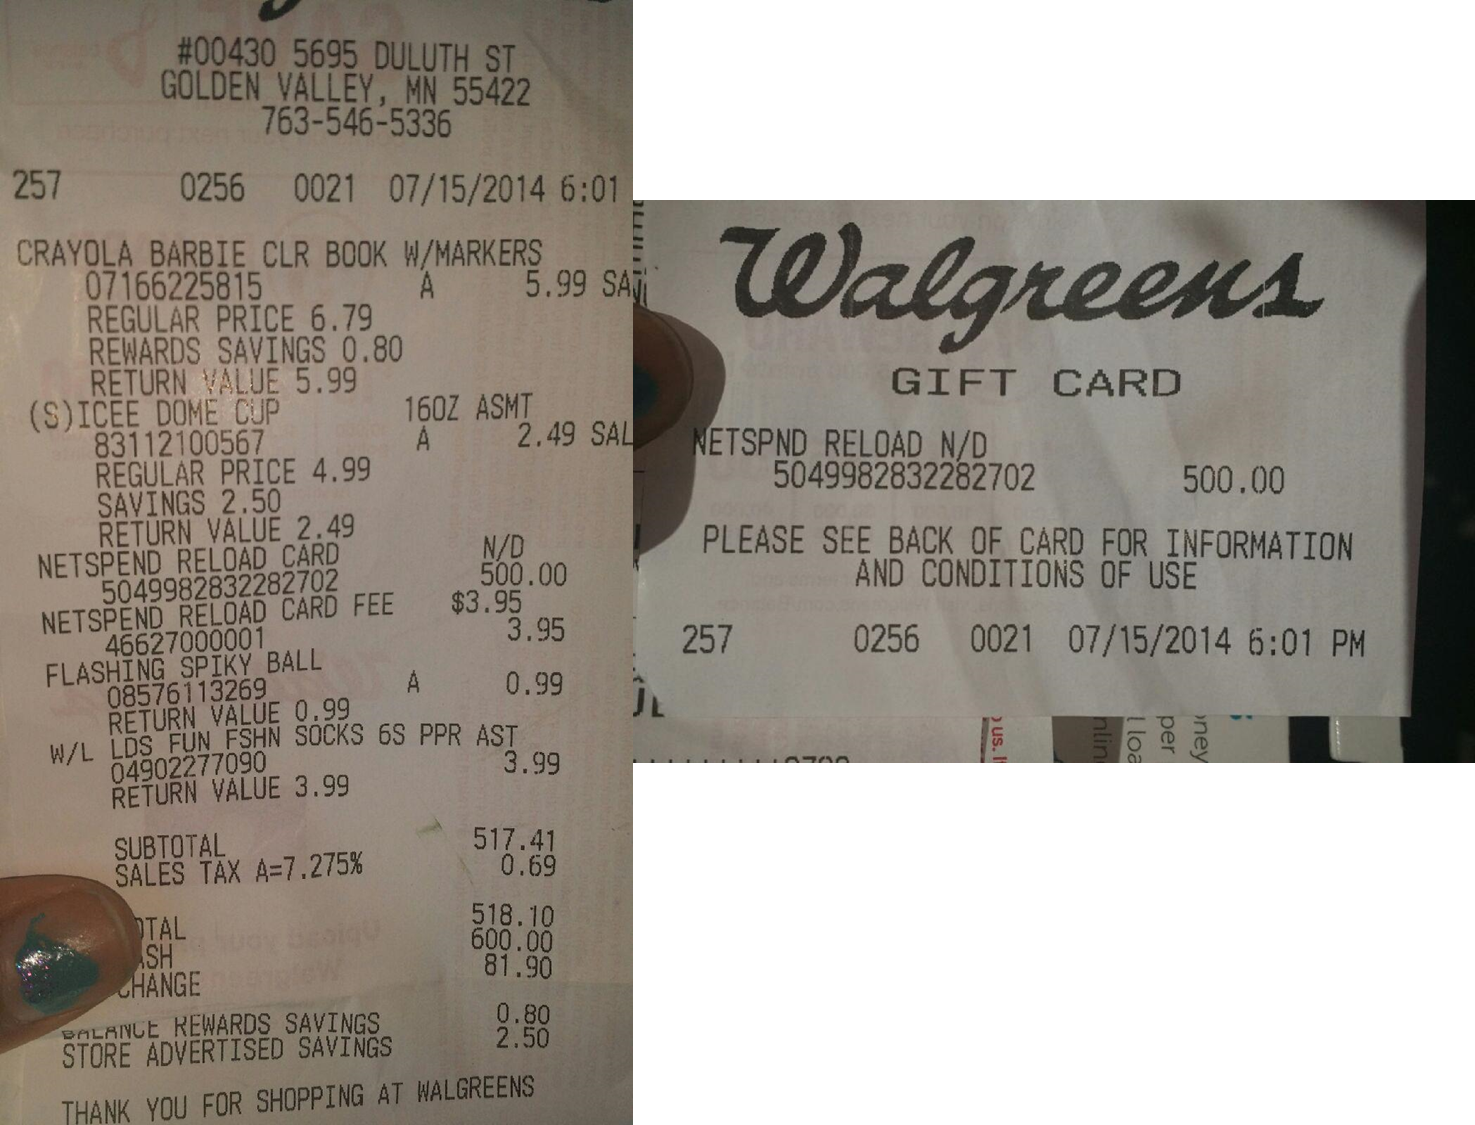 Walgreens Receipt for NetSpend Reload Card Purchase